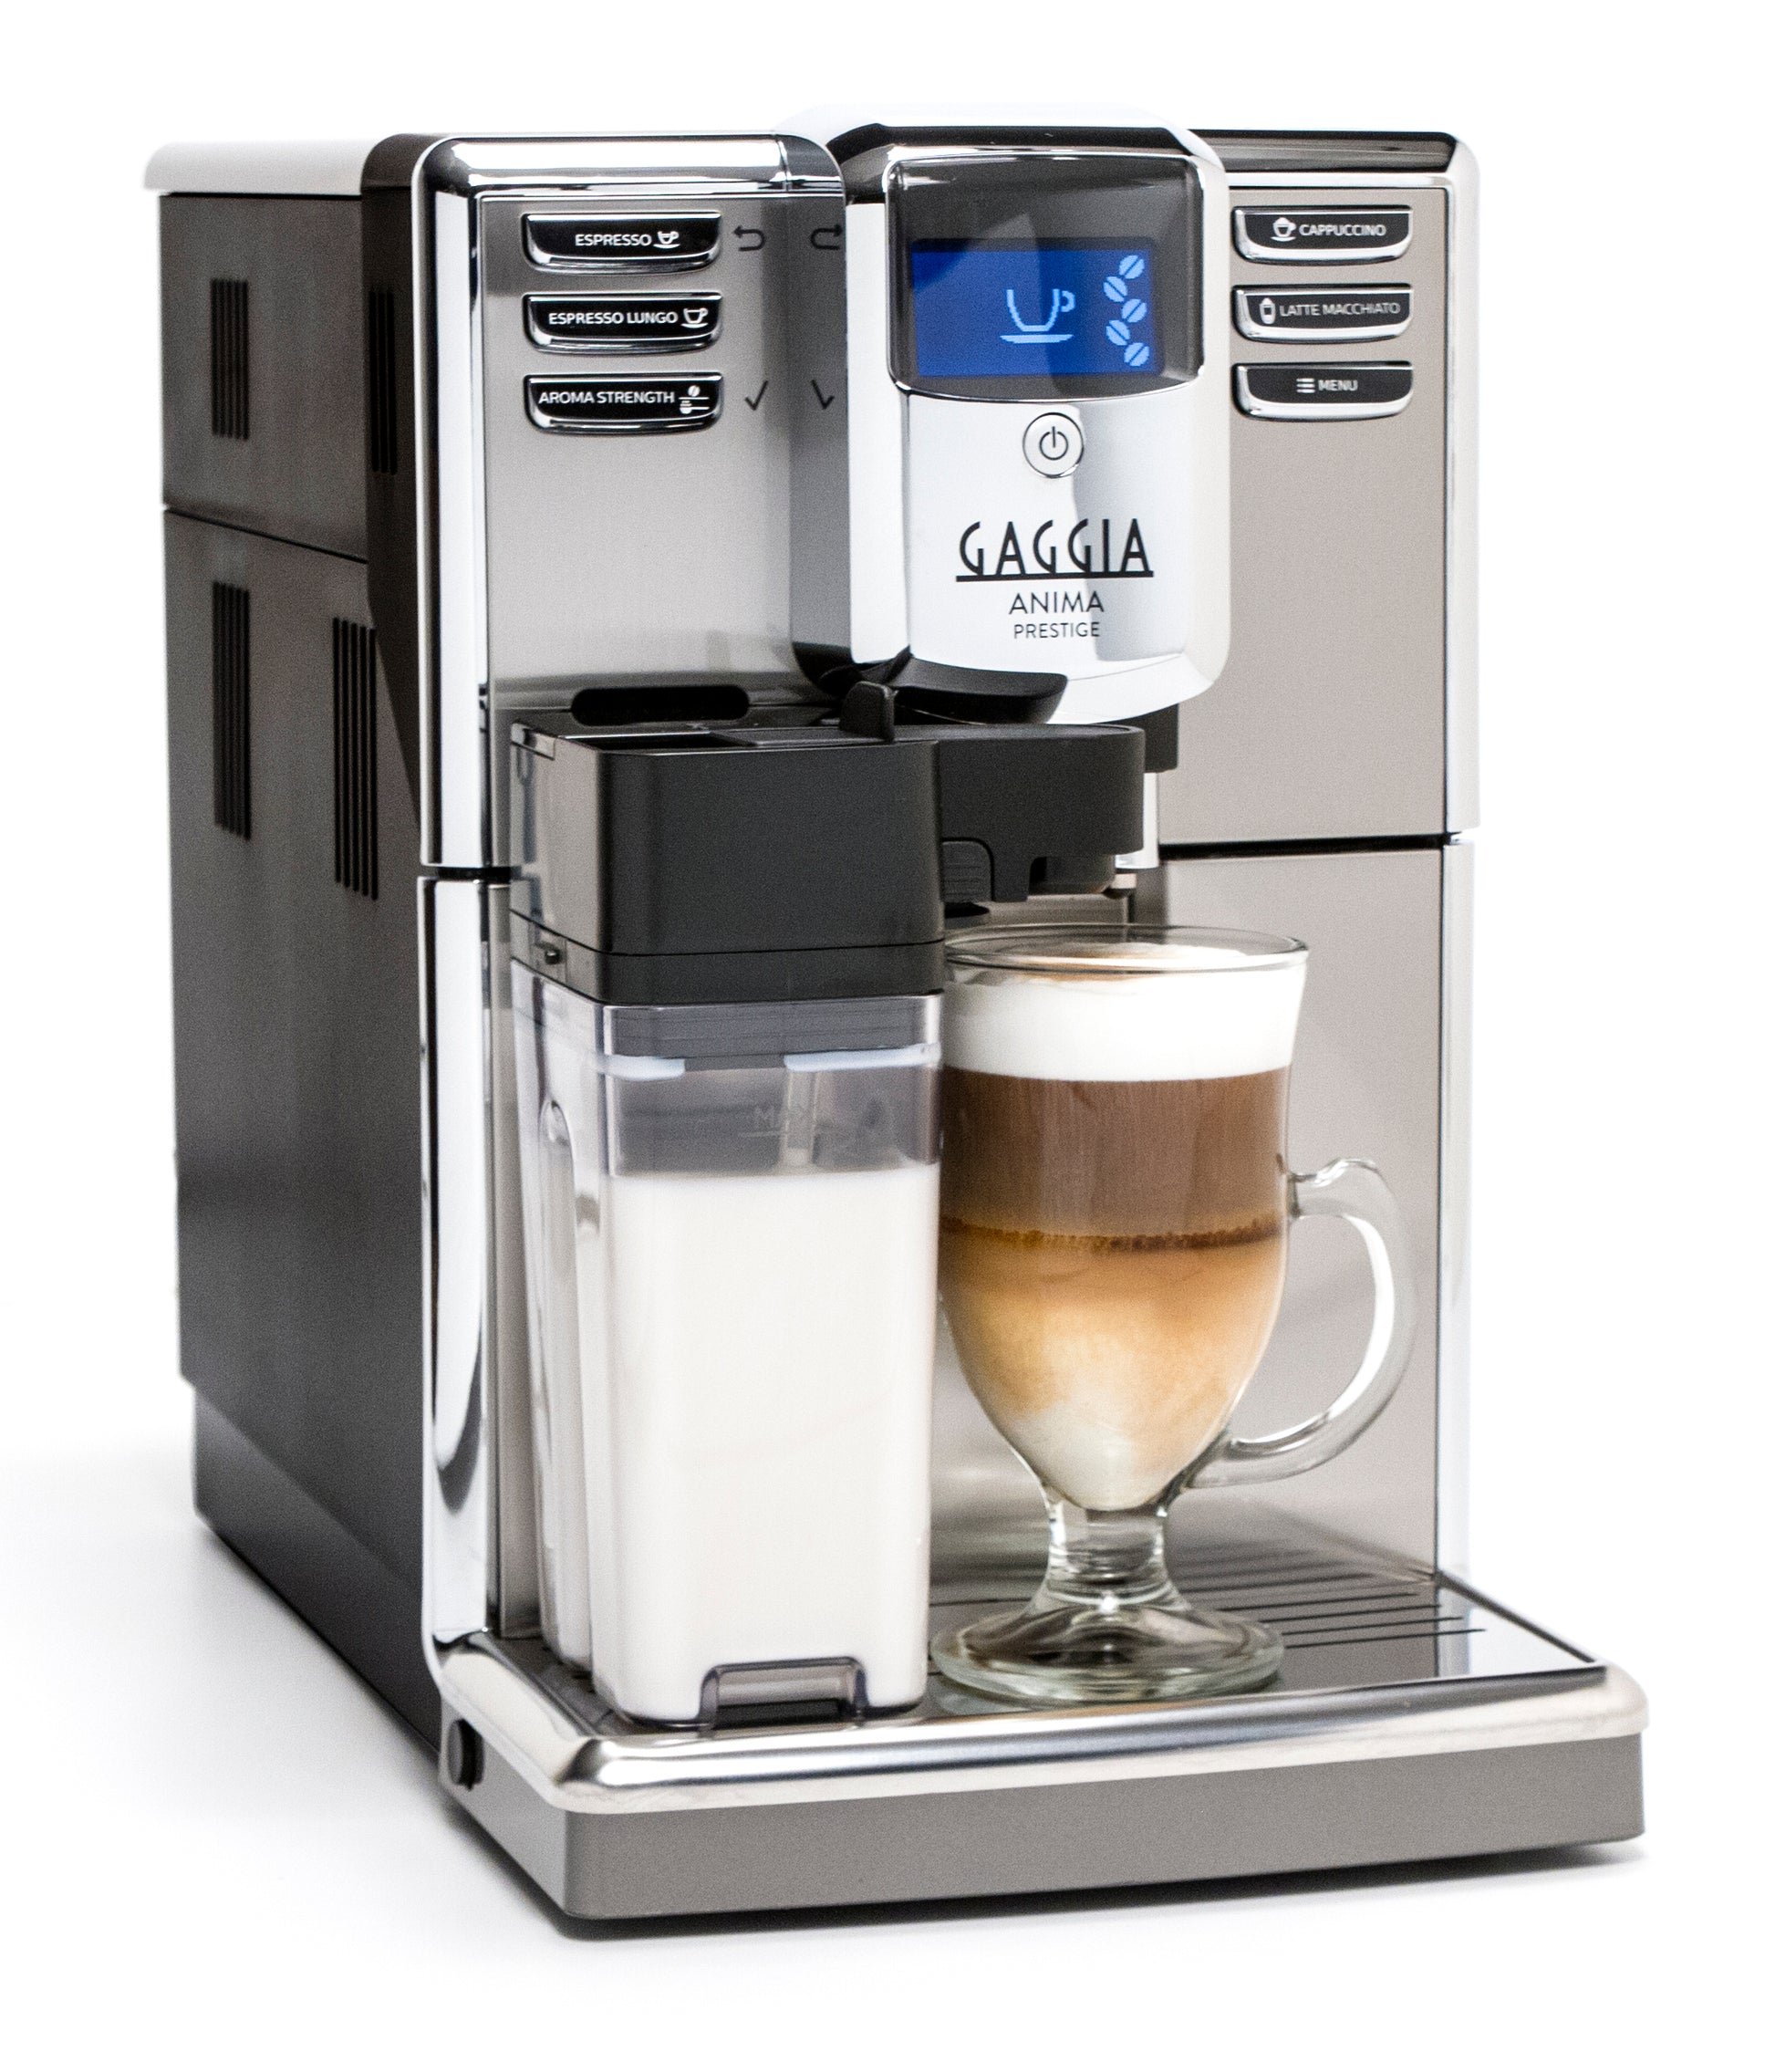 One Touch Latte Coffee Machine, Fully automatic latte machine